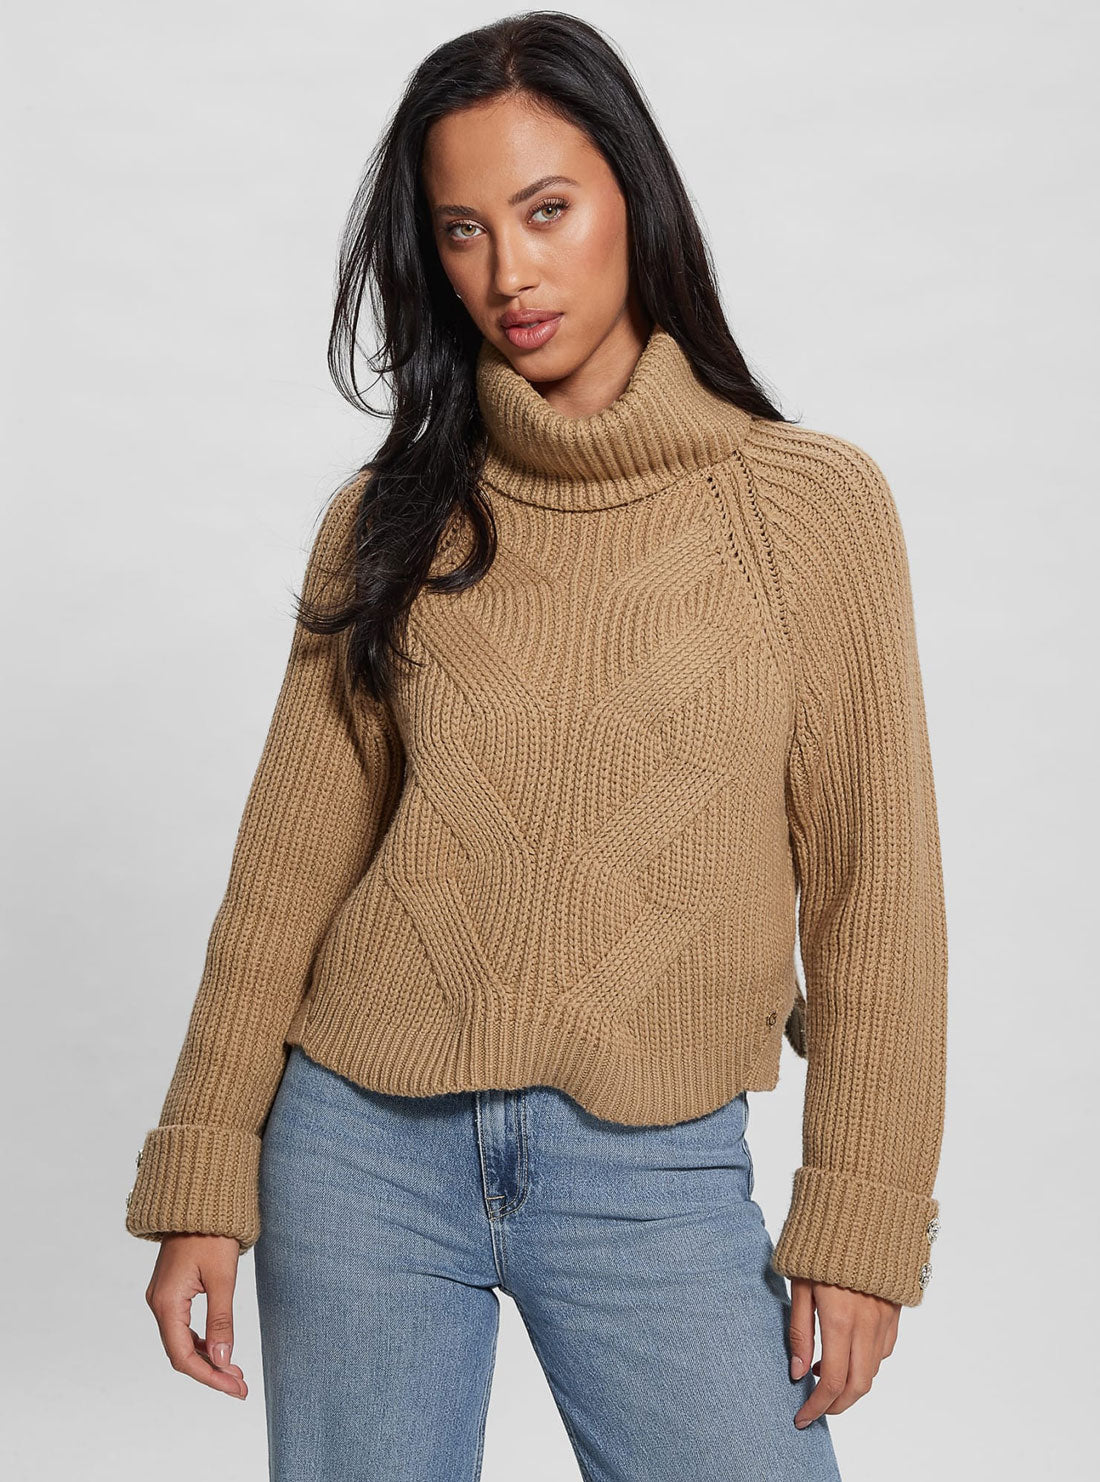 Taupe Brown Lois Turtleneck Knit Top | GUESS Women's Apparel | front view